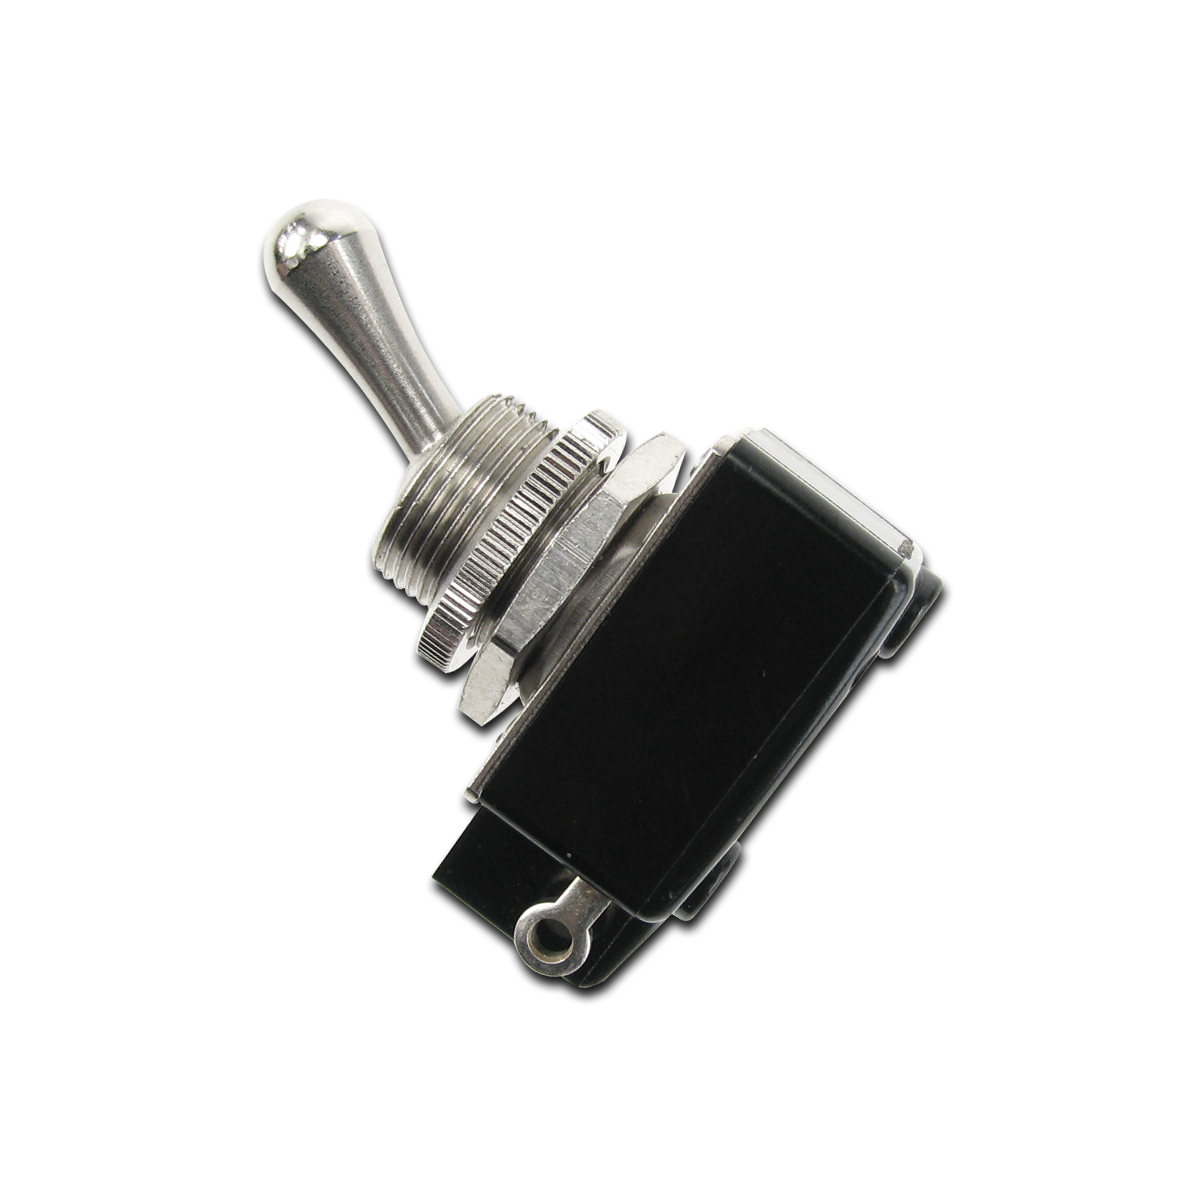 On/off switch for Elma polishing drum